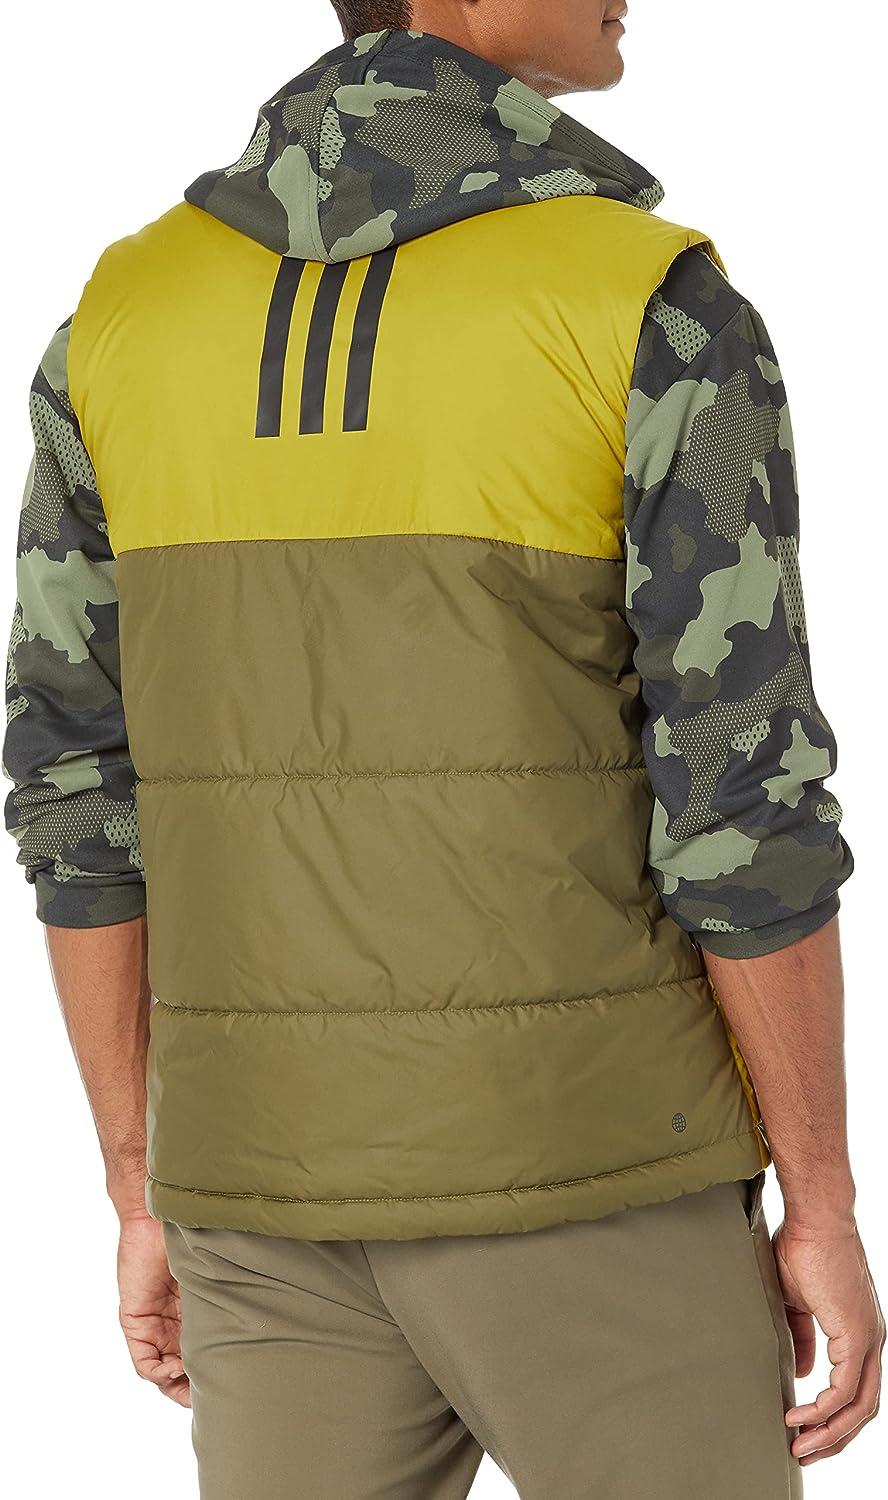 ADVENTER & FISHING INSULATED VEST OLIVE 